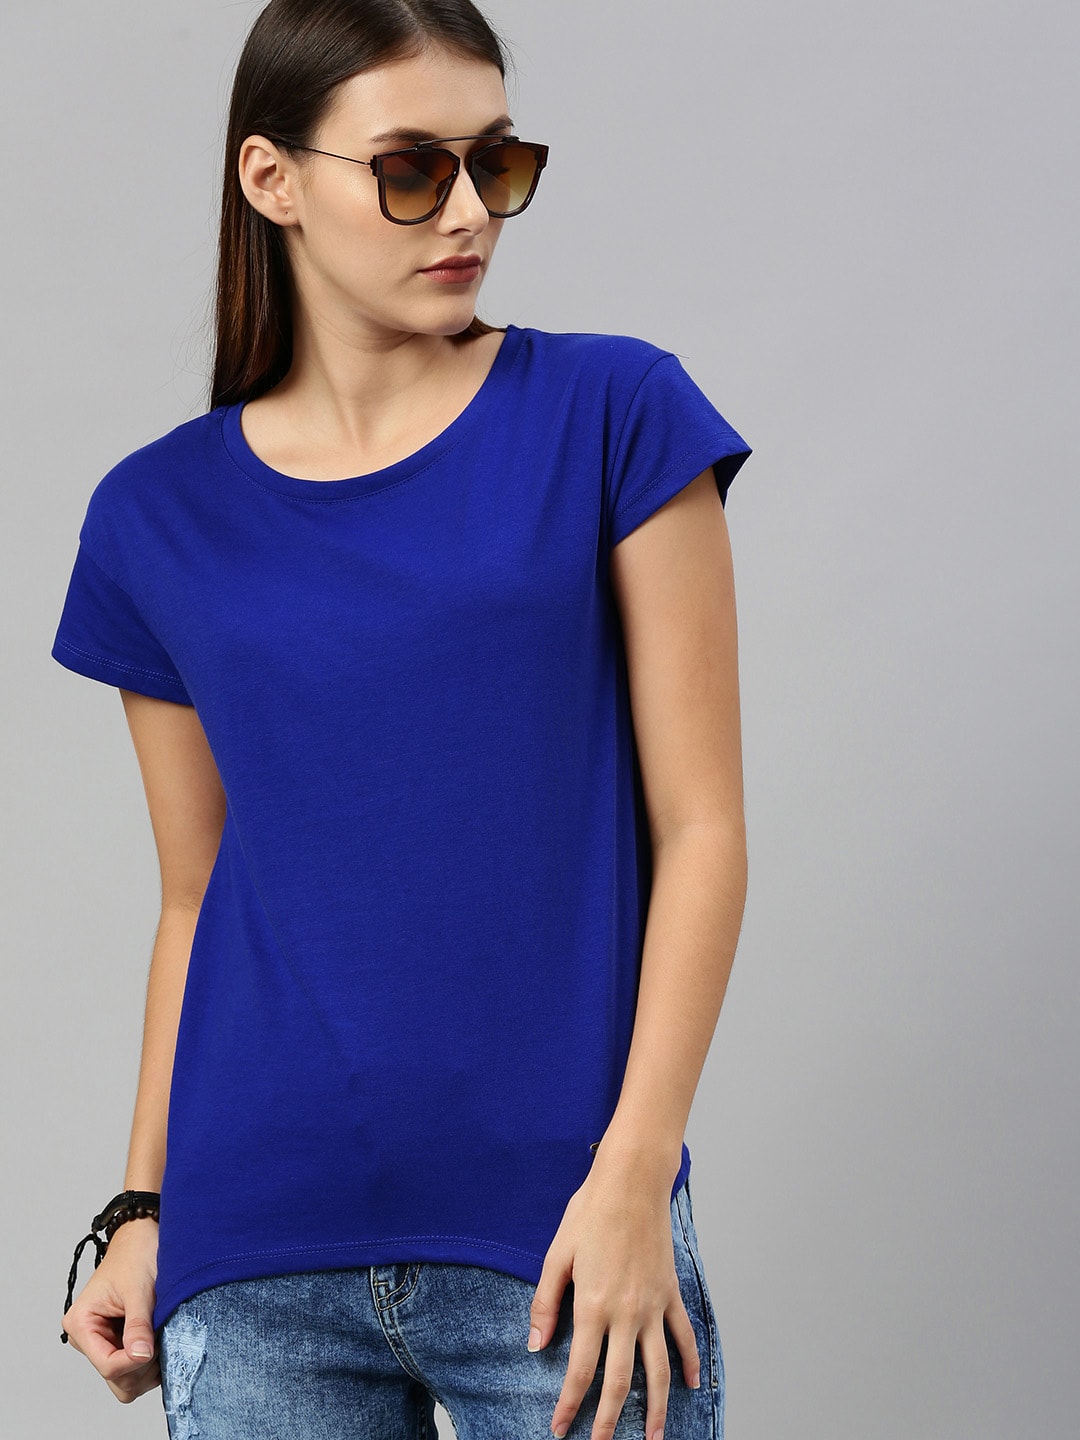 Roadster Women Blue Solid Round Neck T-shirt Price in India